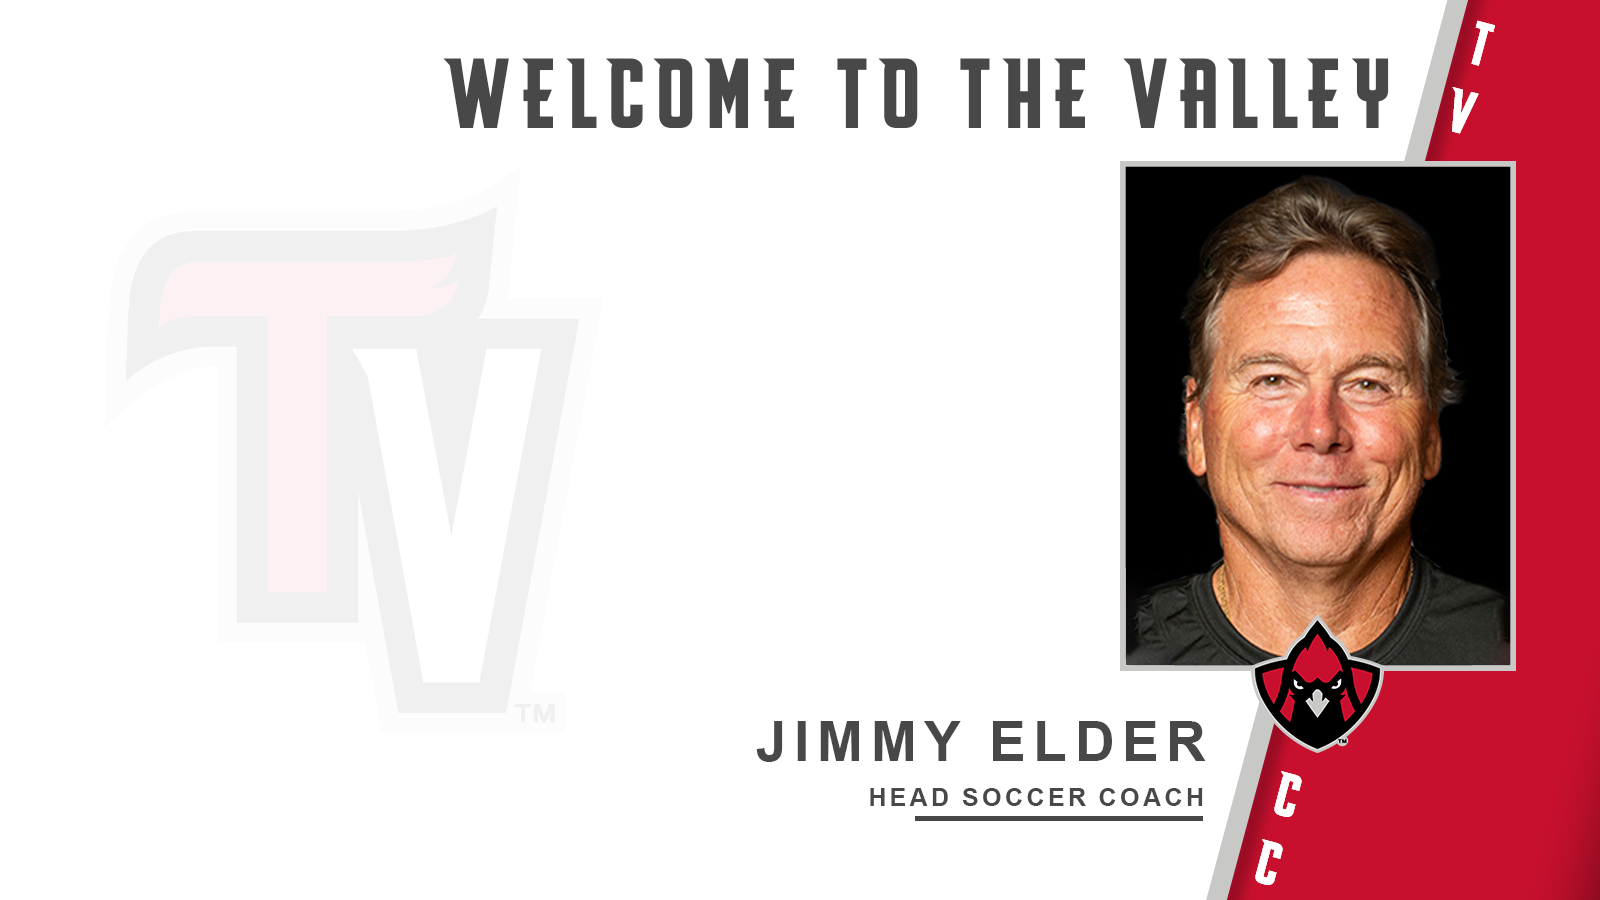 WELCOME TO THE VALLEY: Jimmy Elder named head soccer coach